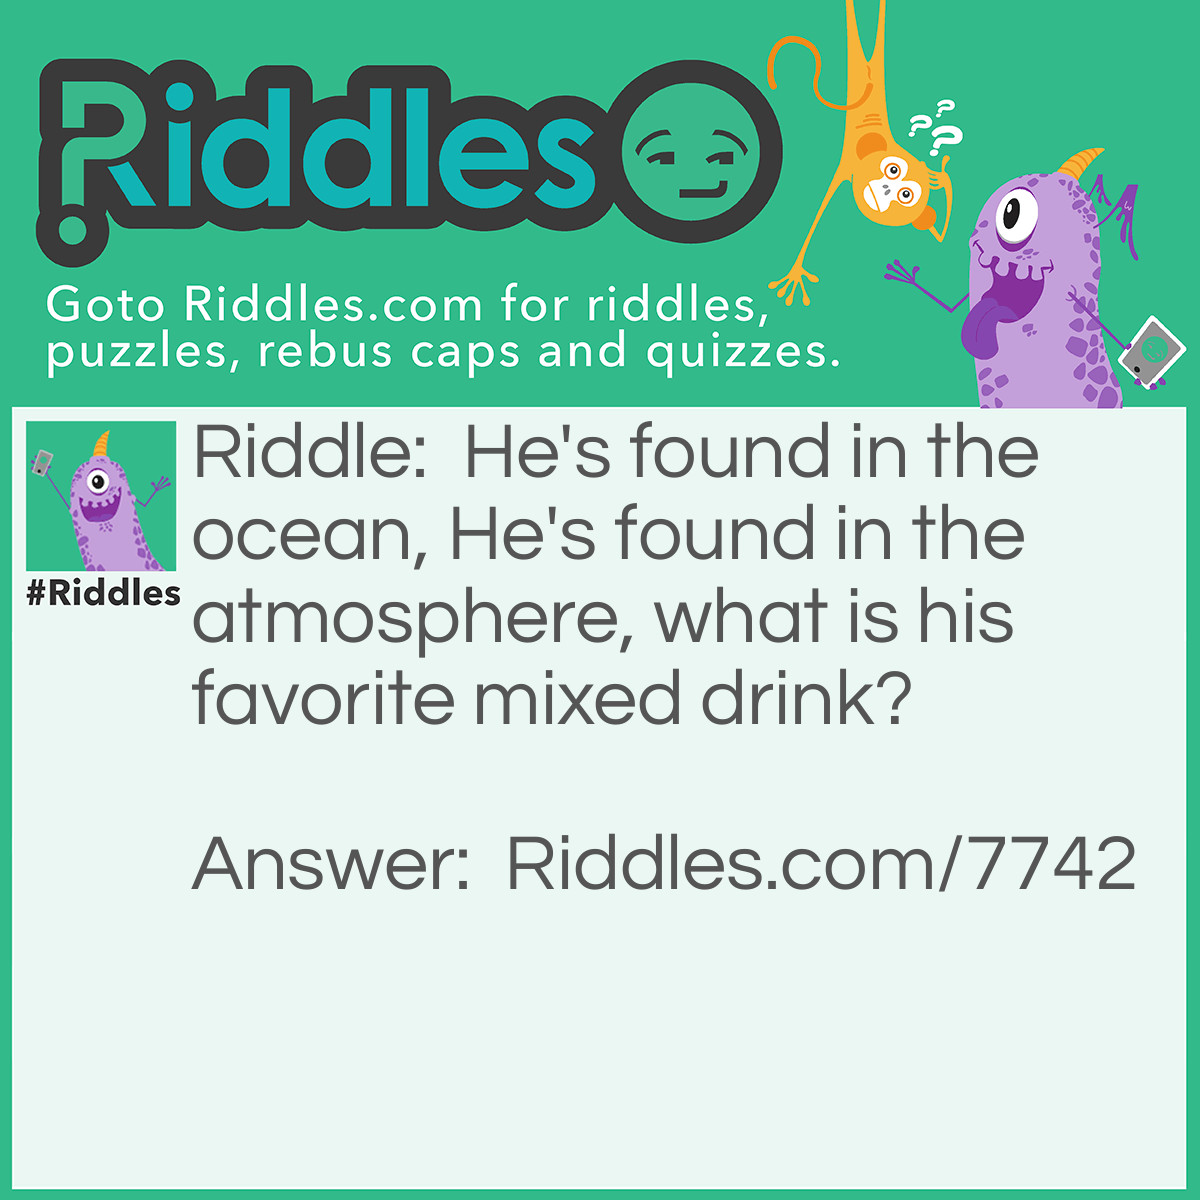 Riddle: He's found in the ocean, He's found in the atmosphere, what is his favorite mixed drink? Answer: Oxygen and Juice!